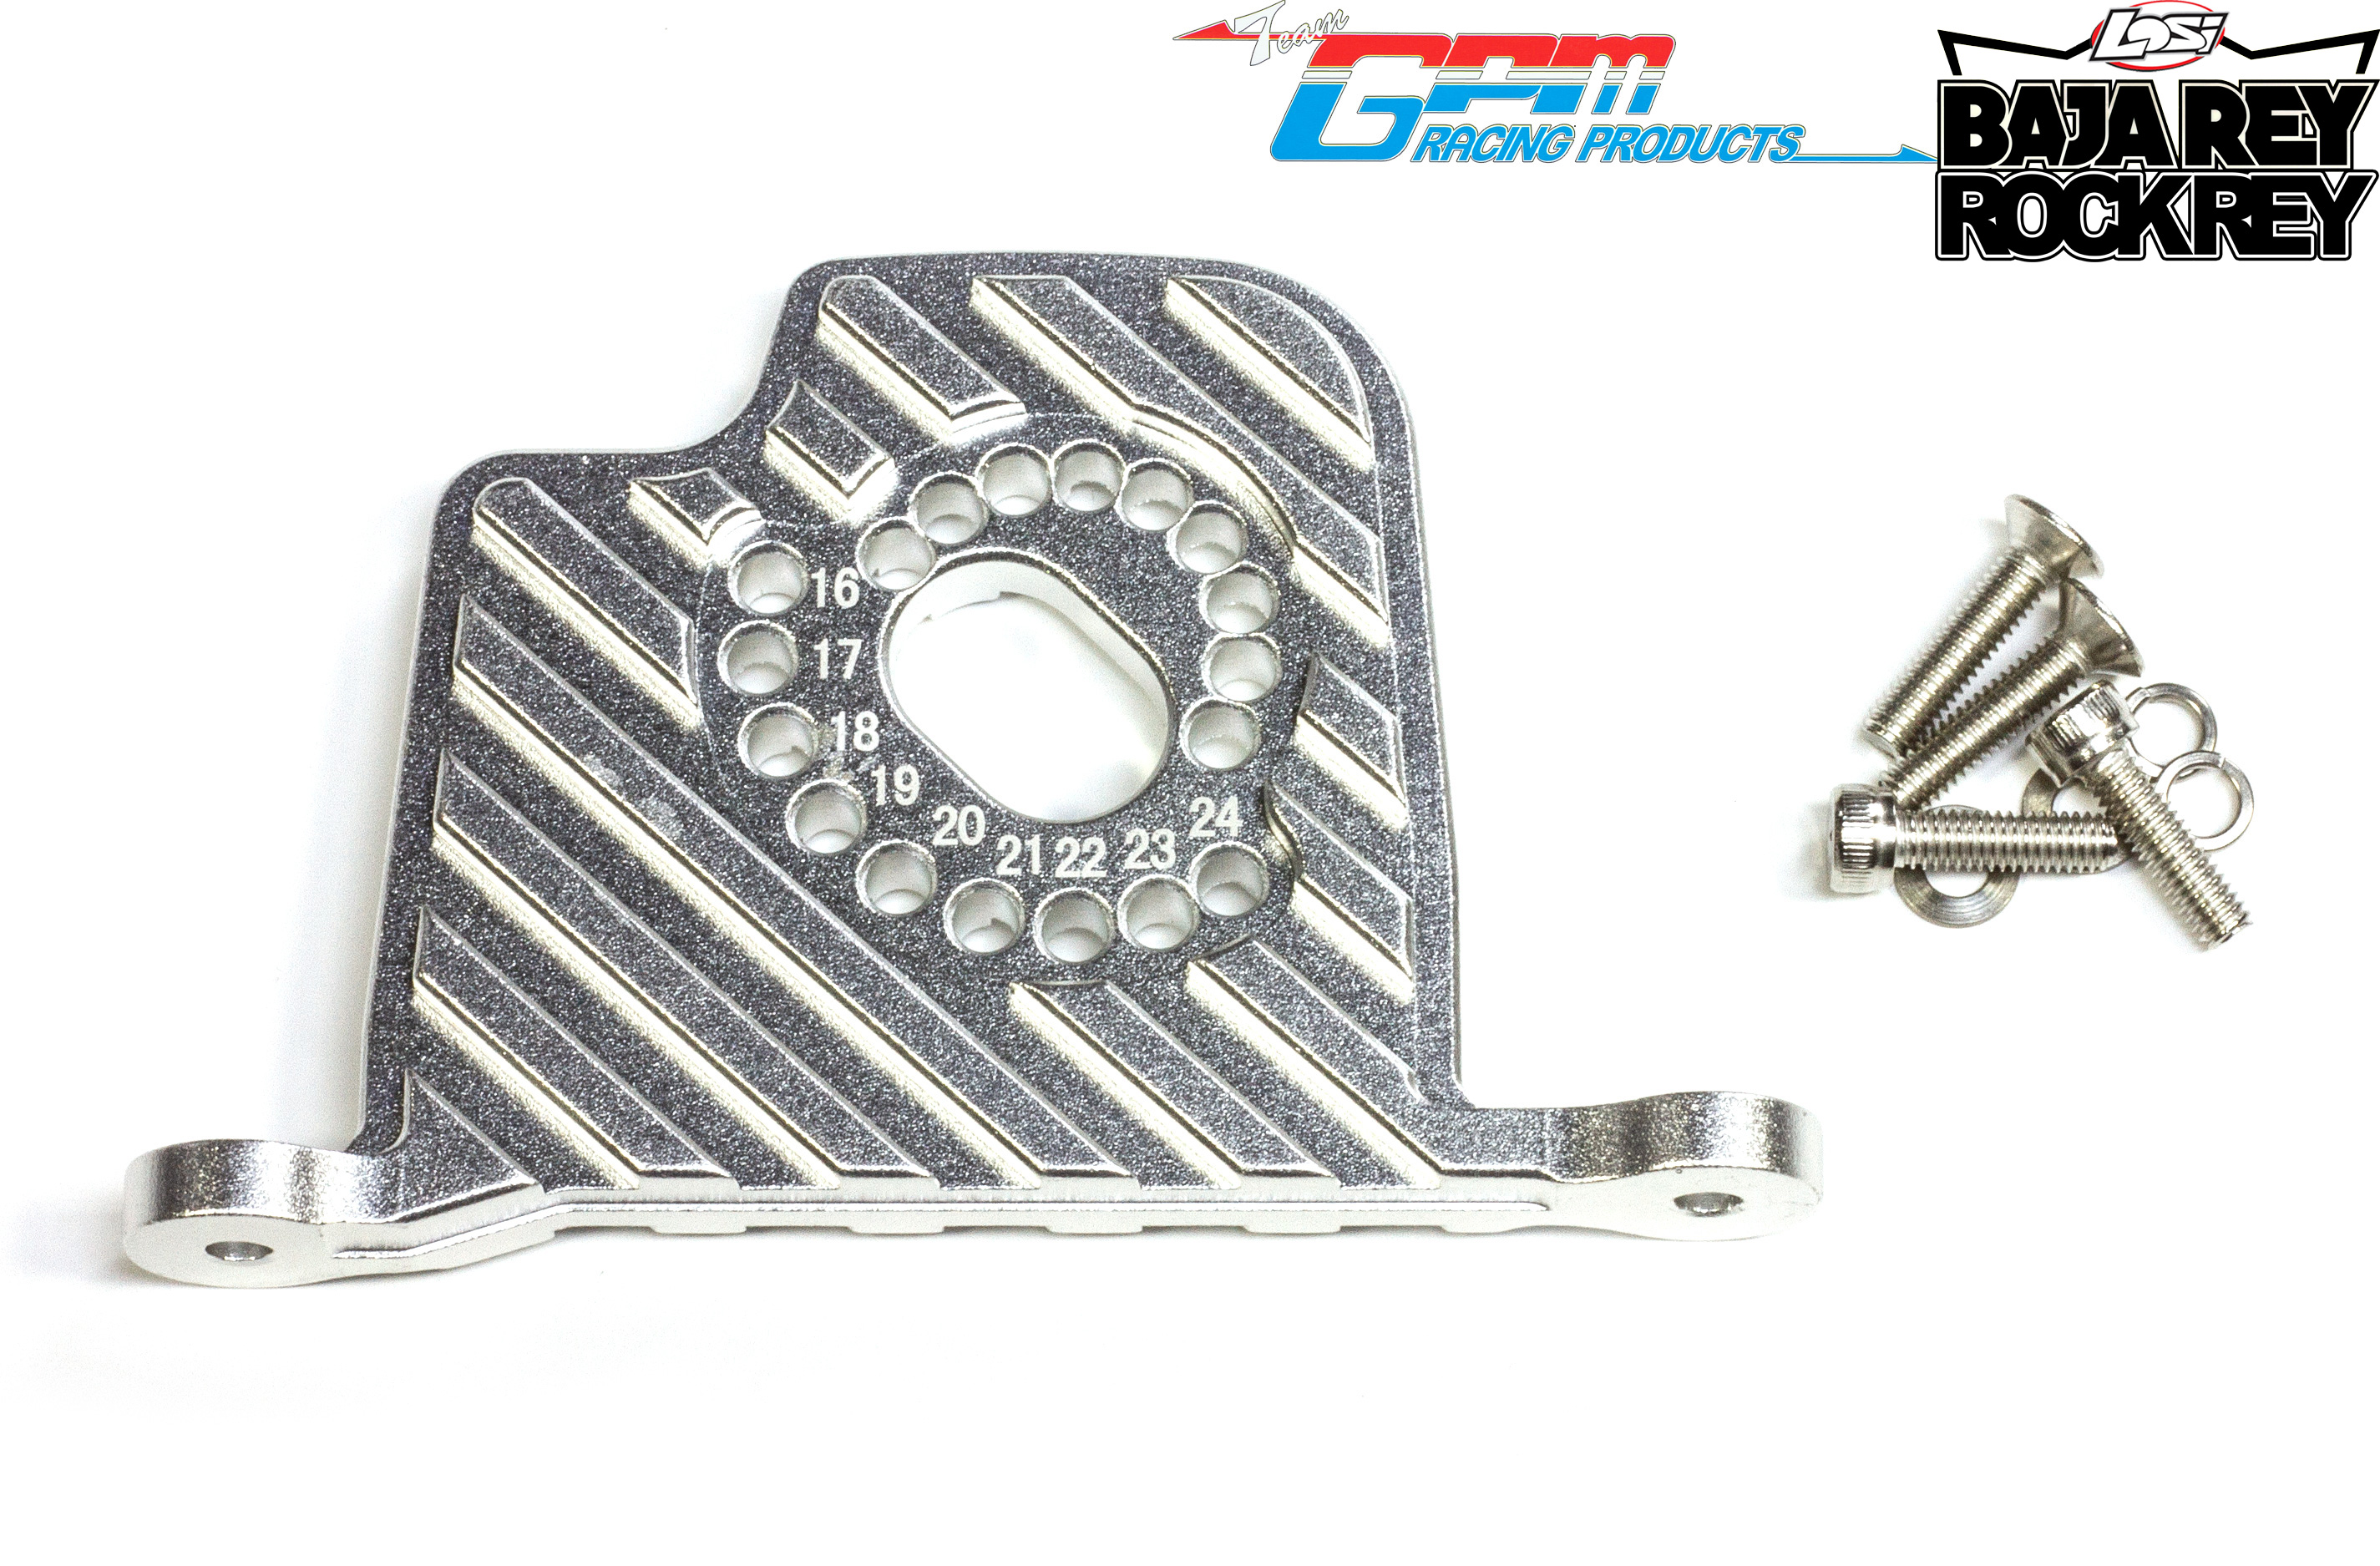 SB018 GPM aluminum motor mount with cooling fins for Losi Super Baja Rey / 2.0 / Rock Rey